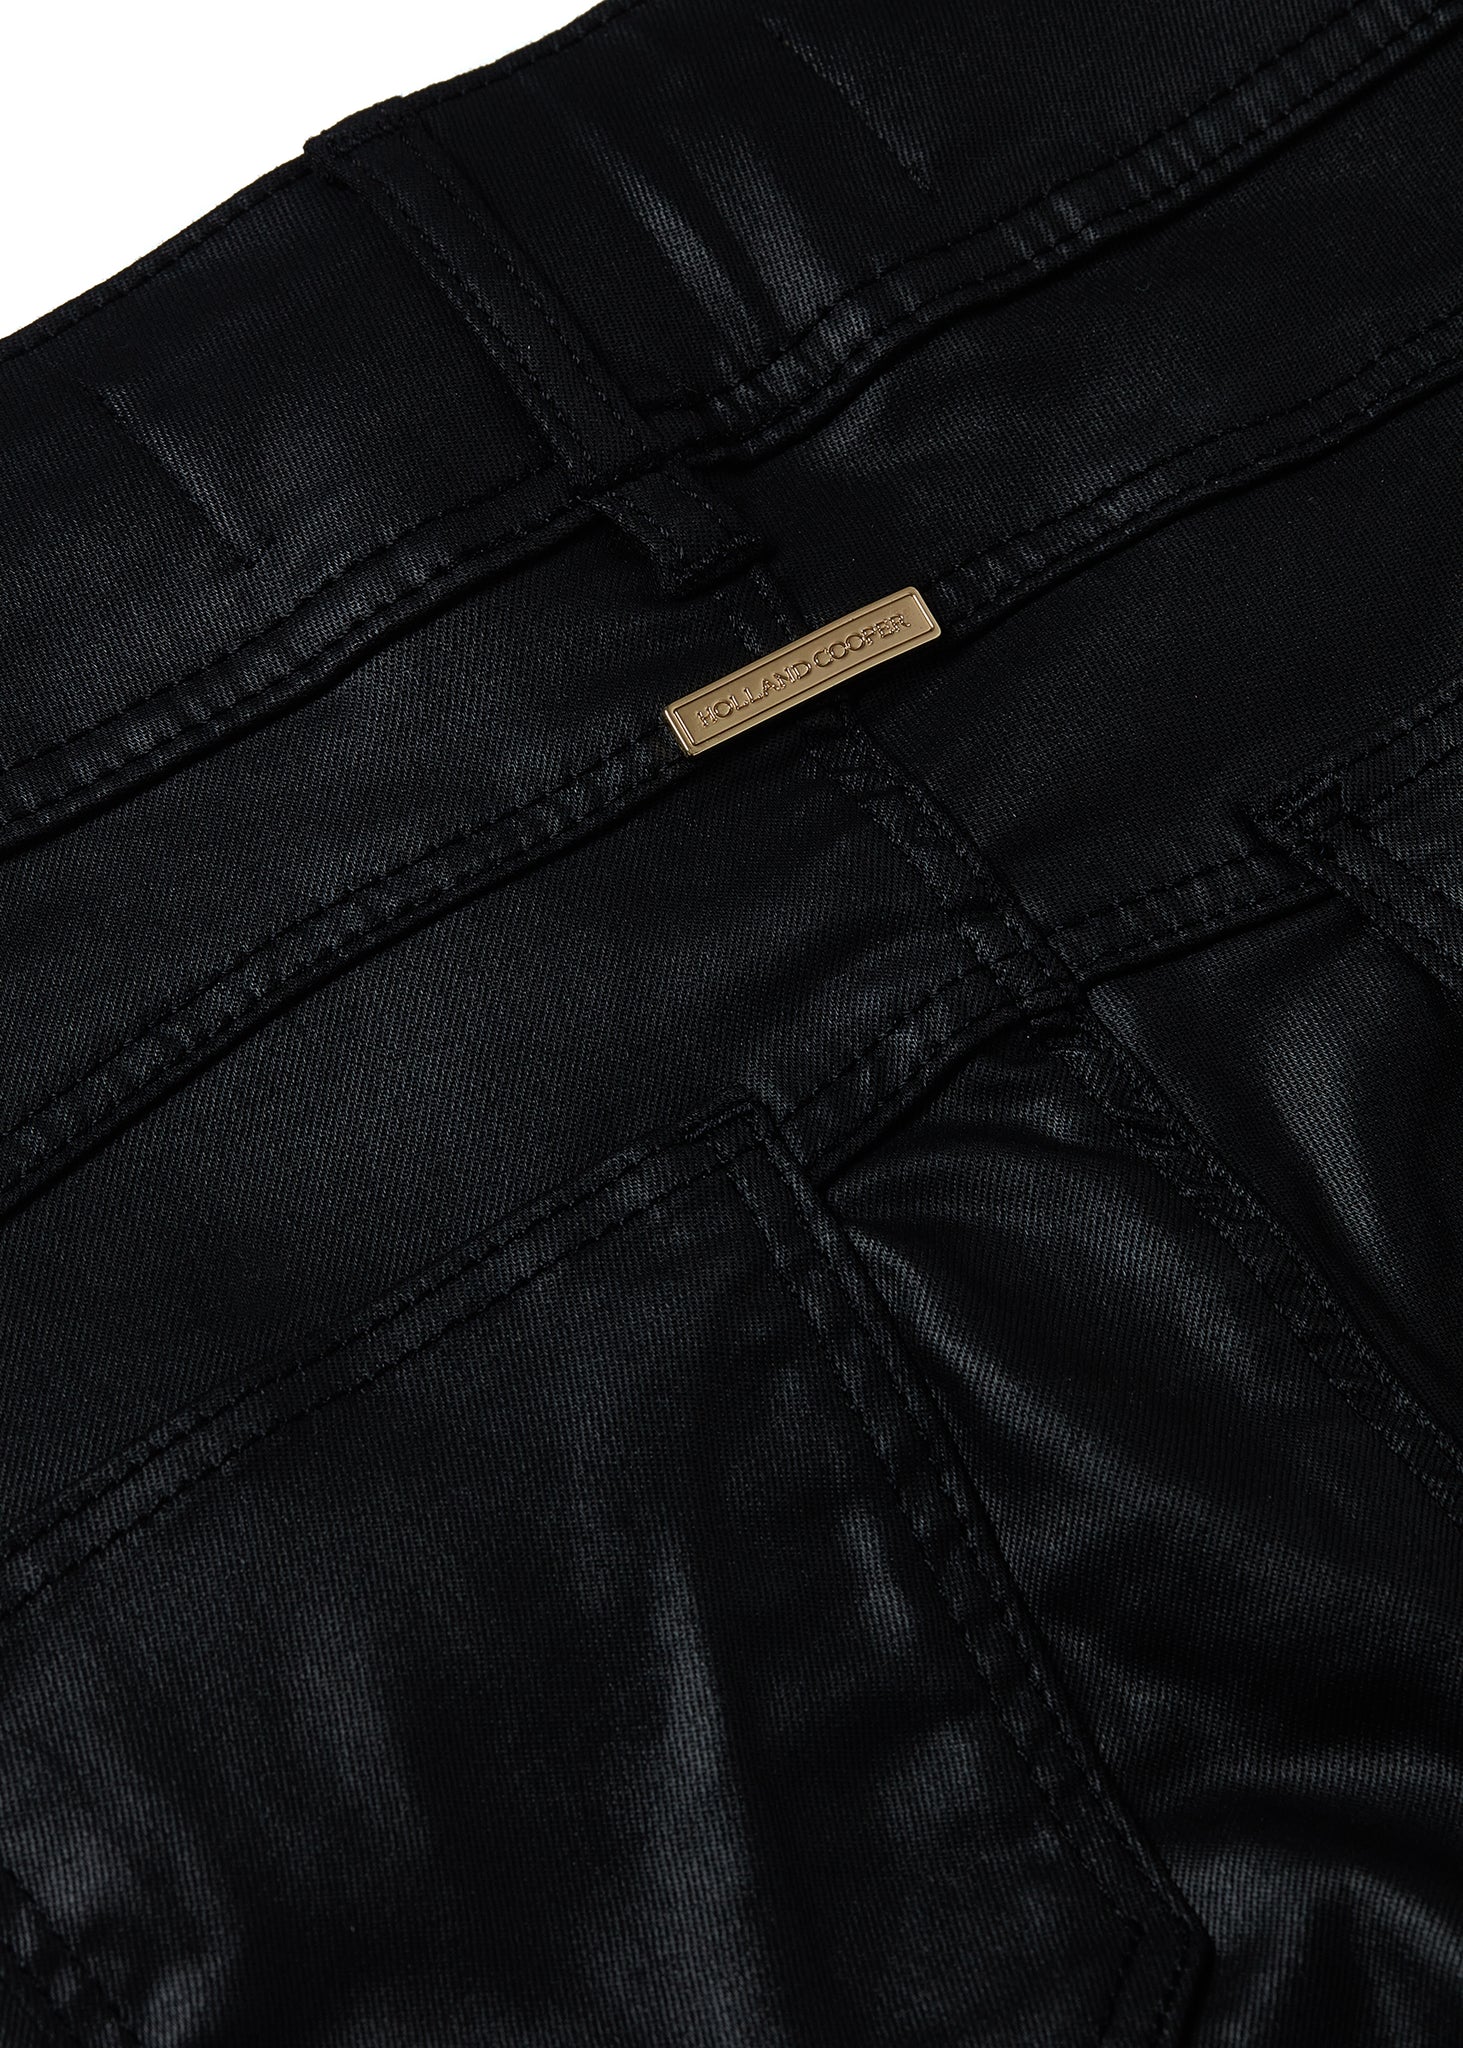 gold hardware on back of womens high rise black coated skinny jean for a leather look with pin tuck biker panels to front and two open zip pockets on front with two open pockets on back